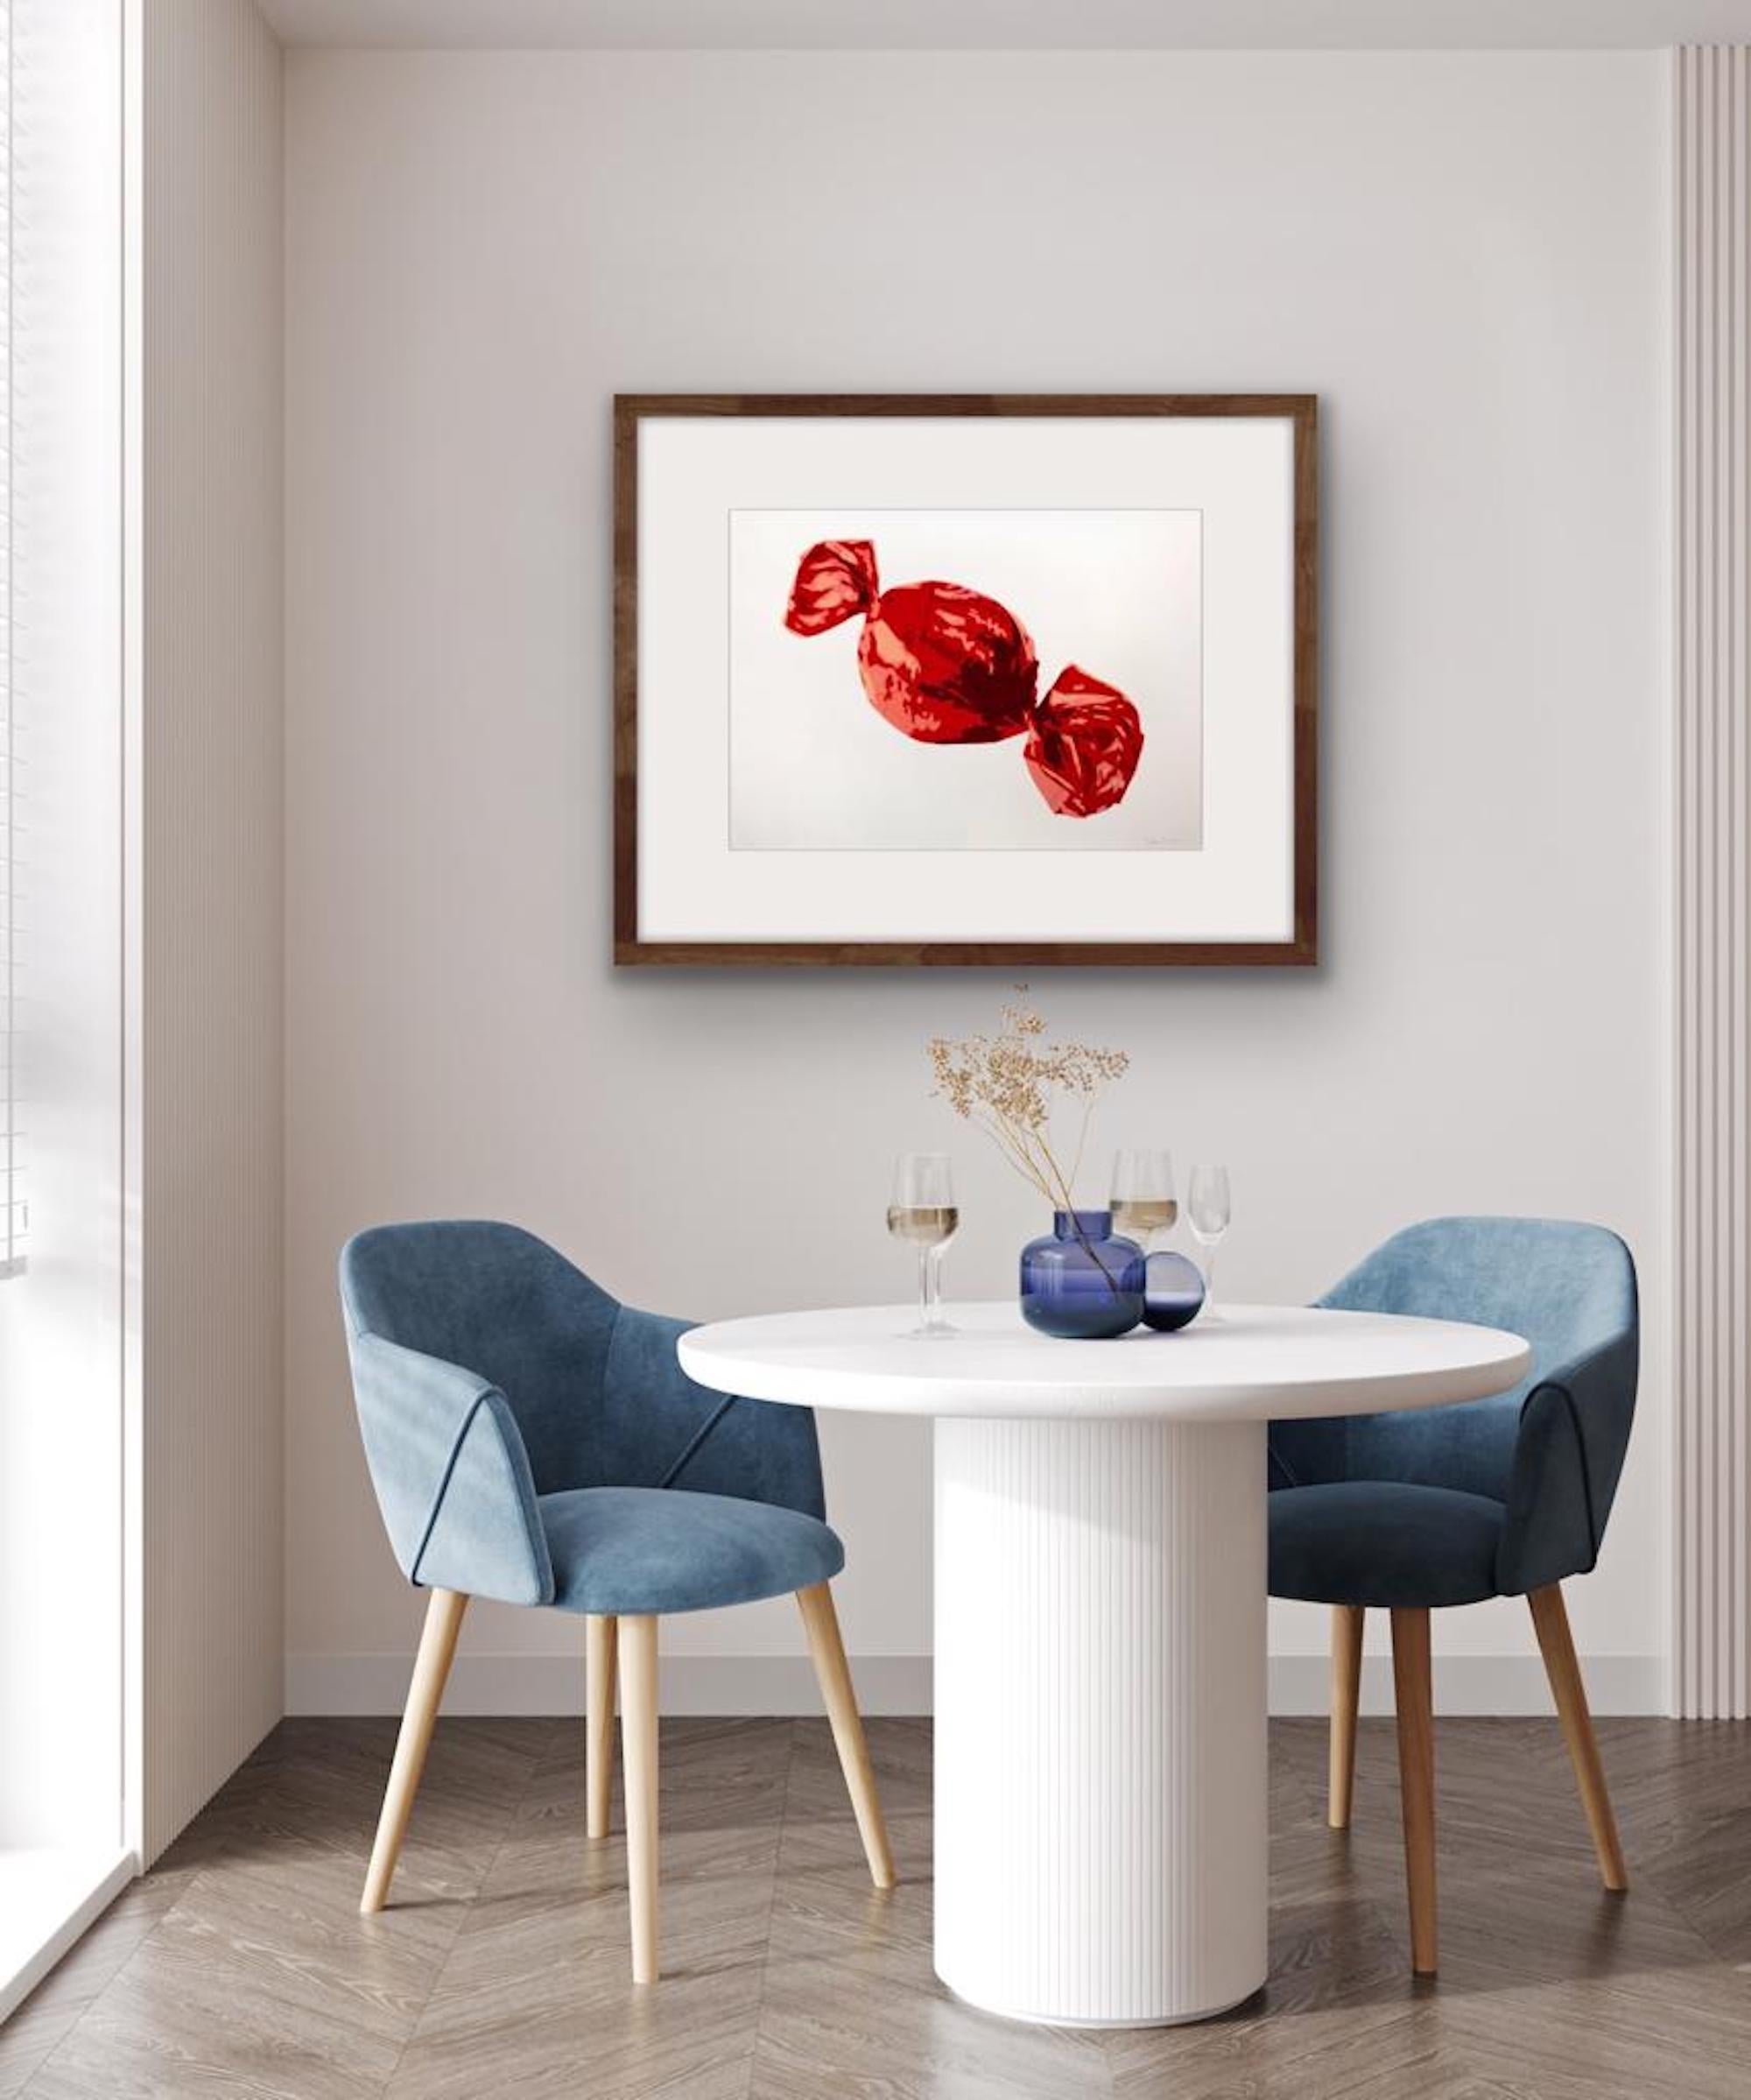 Limited edition print of the original ‘The Red One’ Quality Street Strawberry Cream image by Simon Dry. The first print onto Fabriano paper is over painted in white by Simon and then over printed again to create a uniquely textured hand finished